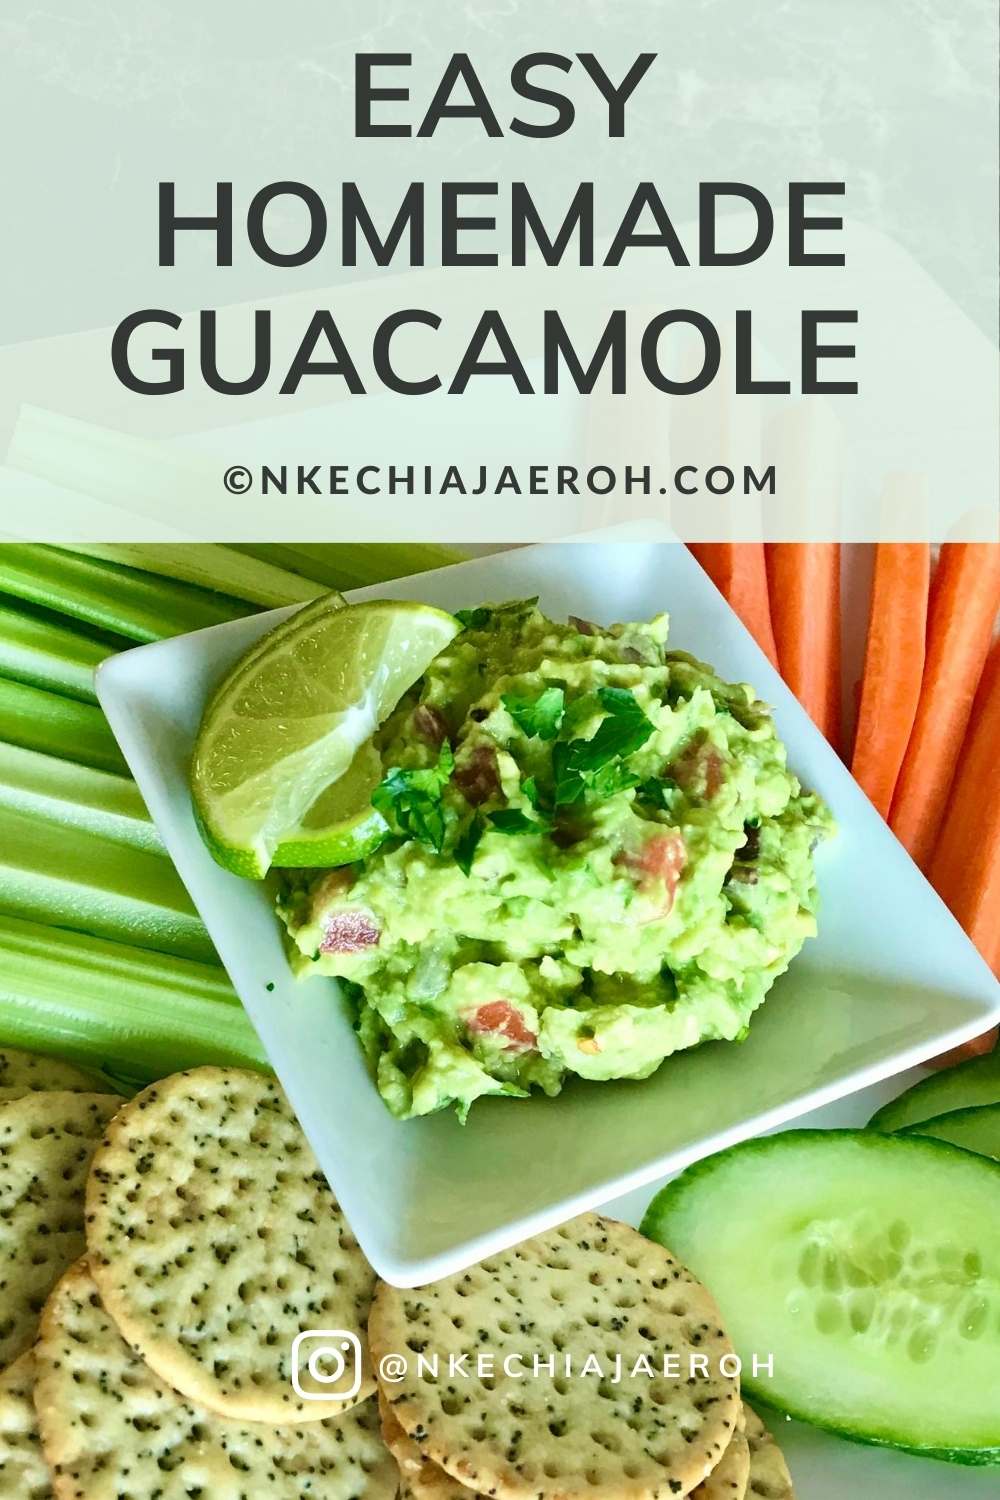 The best guacamole recipe! Whether you are just hosting your family members, friends, or the entire village, fresh guacamole dip is essential. A perfect side dish. Guacamole is great on tacos, salads, and dips/sauces for vegetables and chips. Guacamole tray is such a crowd-pleaser! This quick and easy homemade guacamole recipe is super easy to make and very delicious. #guacamole #Mexicaninspired #sidedishes #easyguacamole #guacamolerecipe #appetizers #tacos #healthydip #Guacamoletray